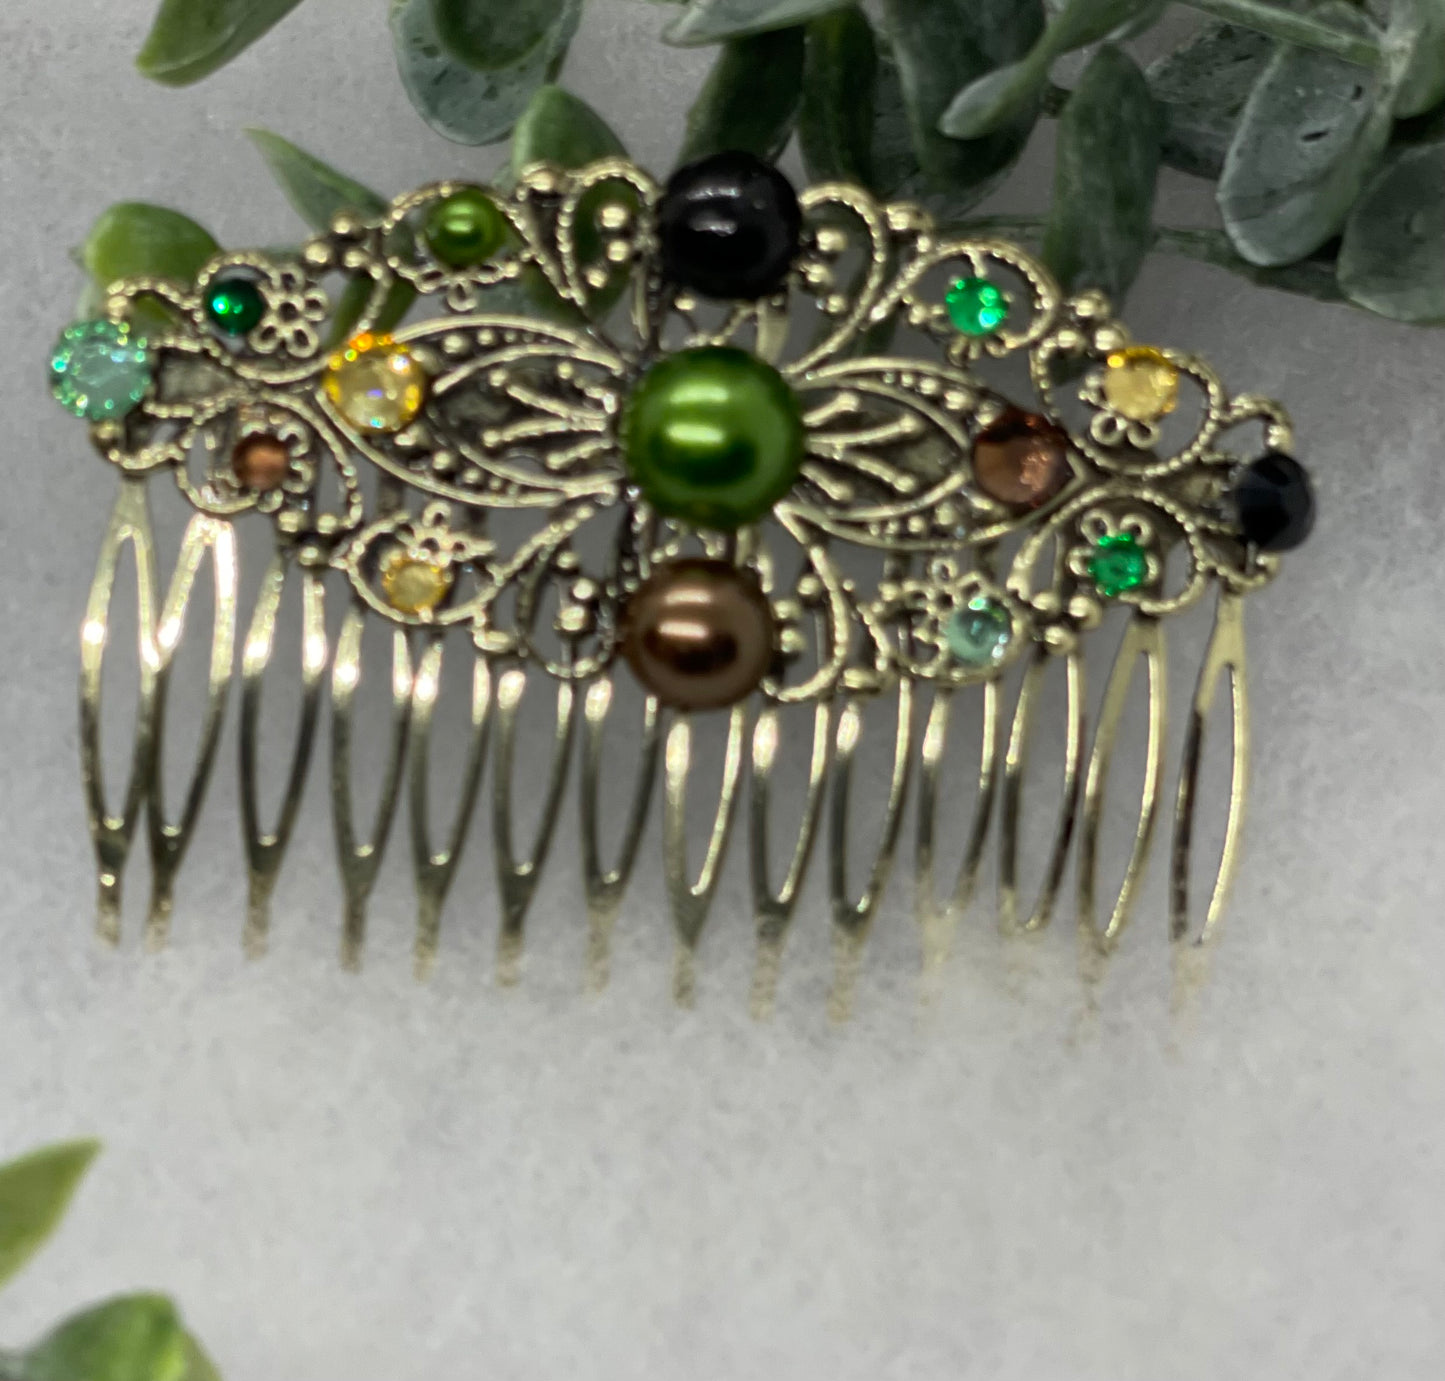 Camouflage crystal rhinestone pearl vintage style antique  hair accessories gift birthday event formal bridesmaid  3.5” Metal side Comb ##650